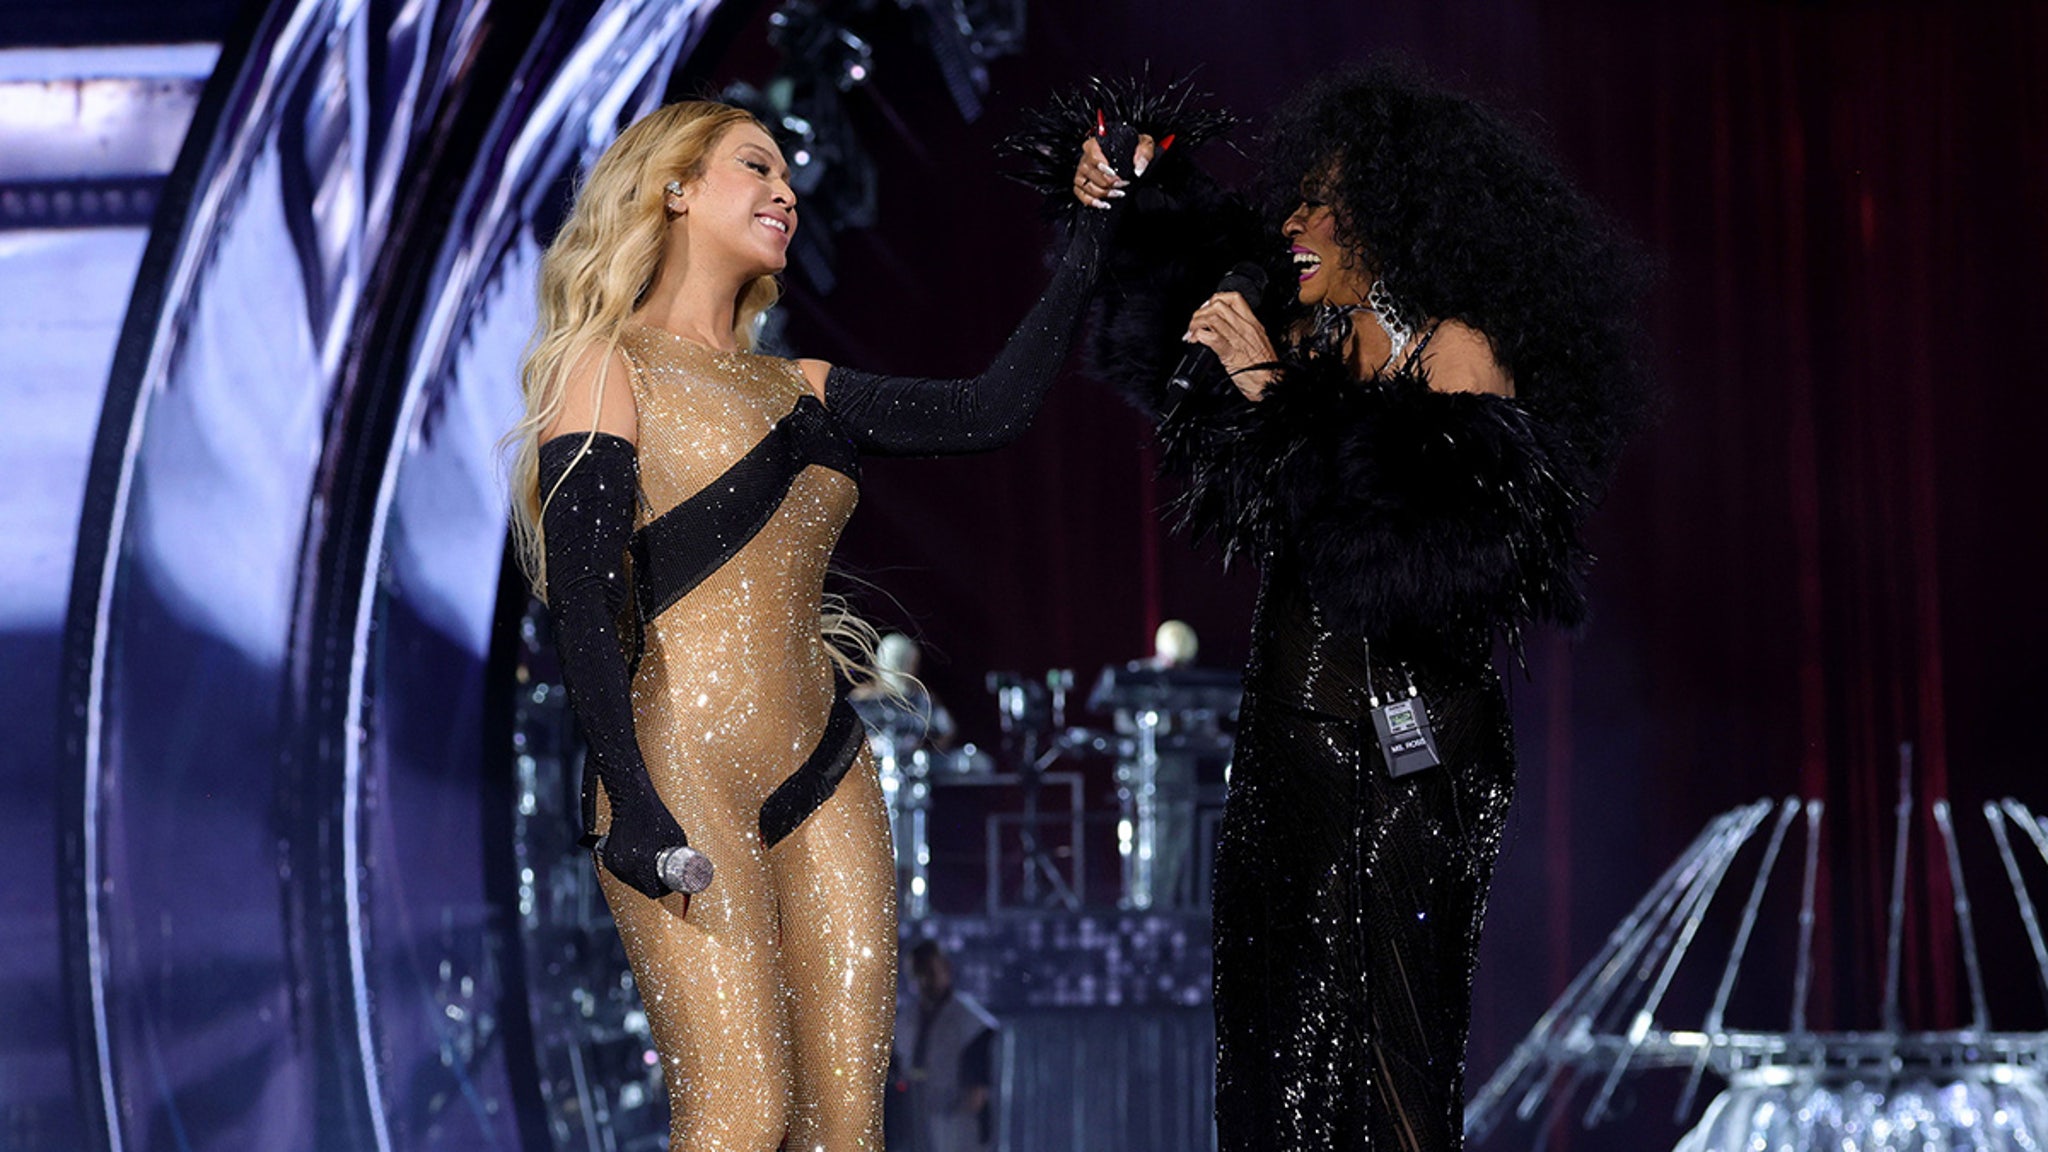 Beyoncé’s Birthday Concert in L.A. Packed with Celebs, Diana Ross Surprise